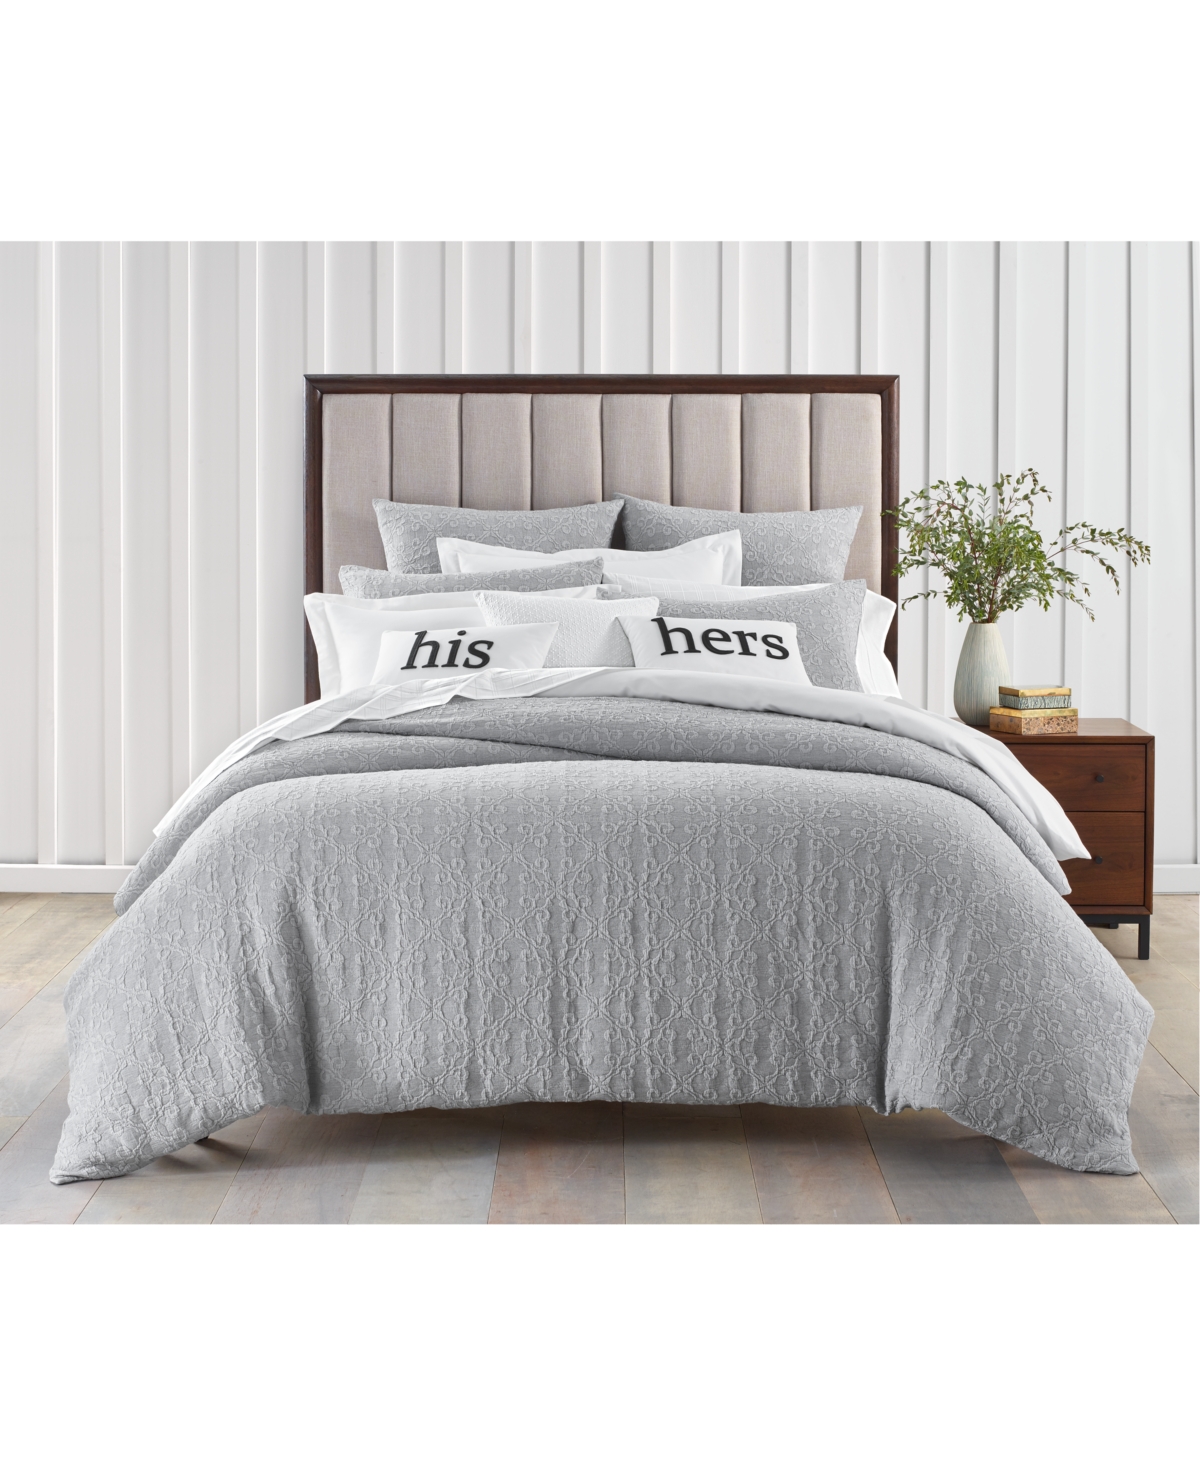 Charter Club Damask Designs Woven Tile 3-pc. Comforter Set, King, Created For Macy's In Grey